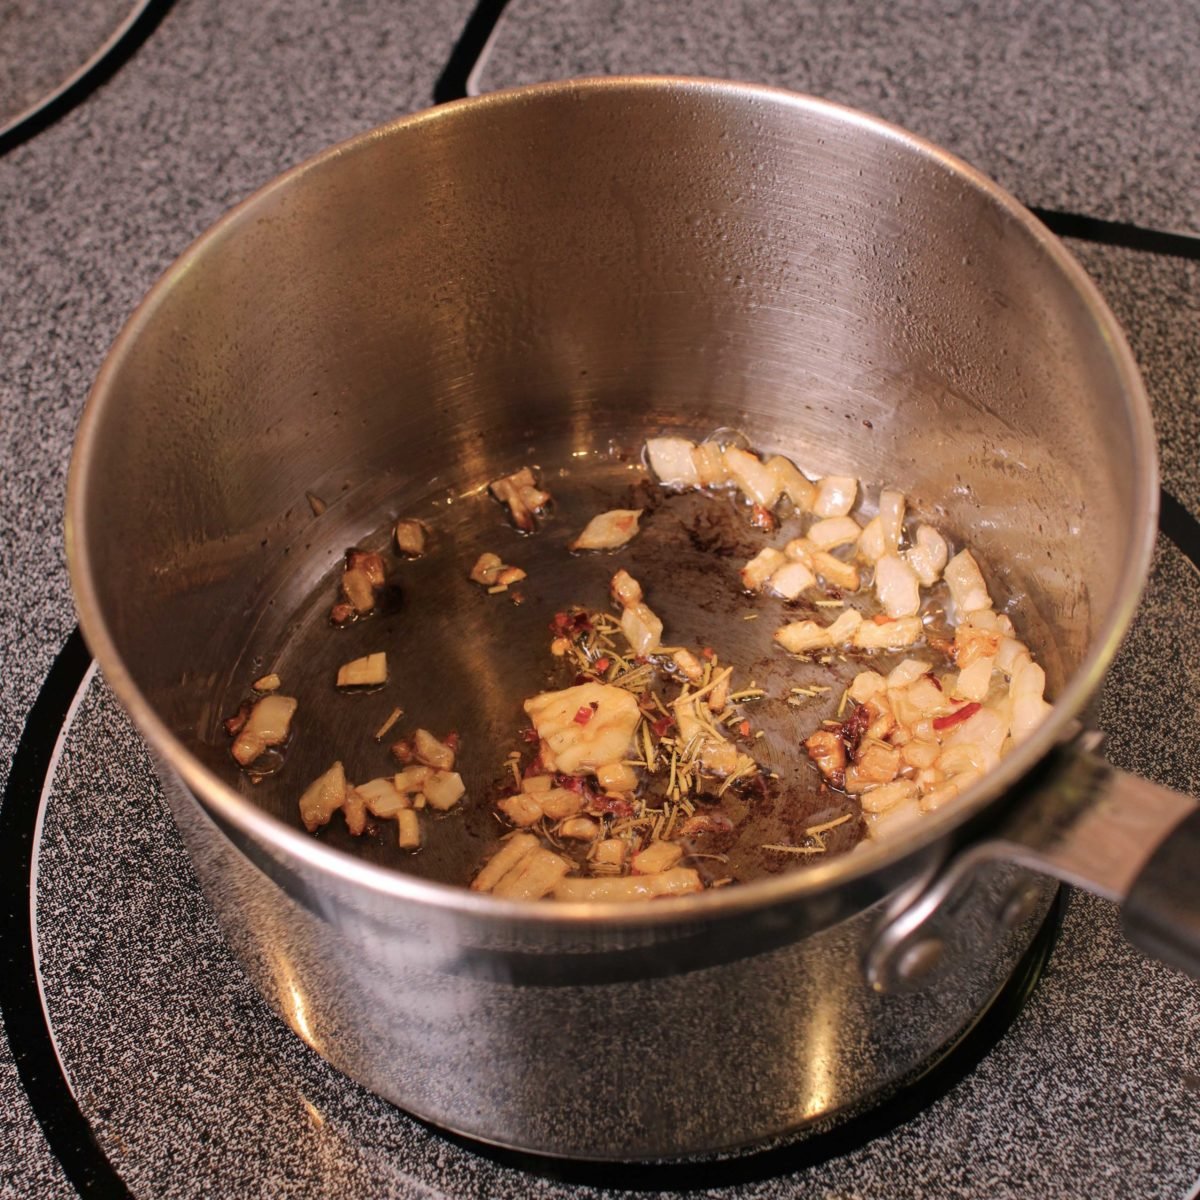 chopped onions and garlic in a silver pot on a stove.